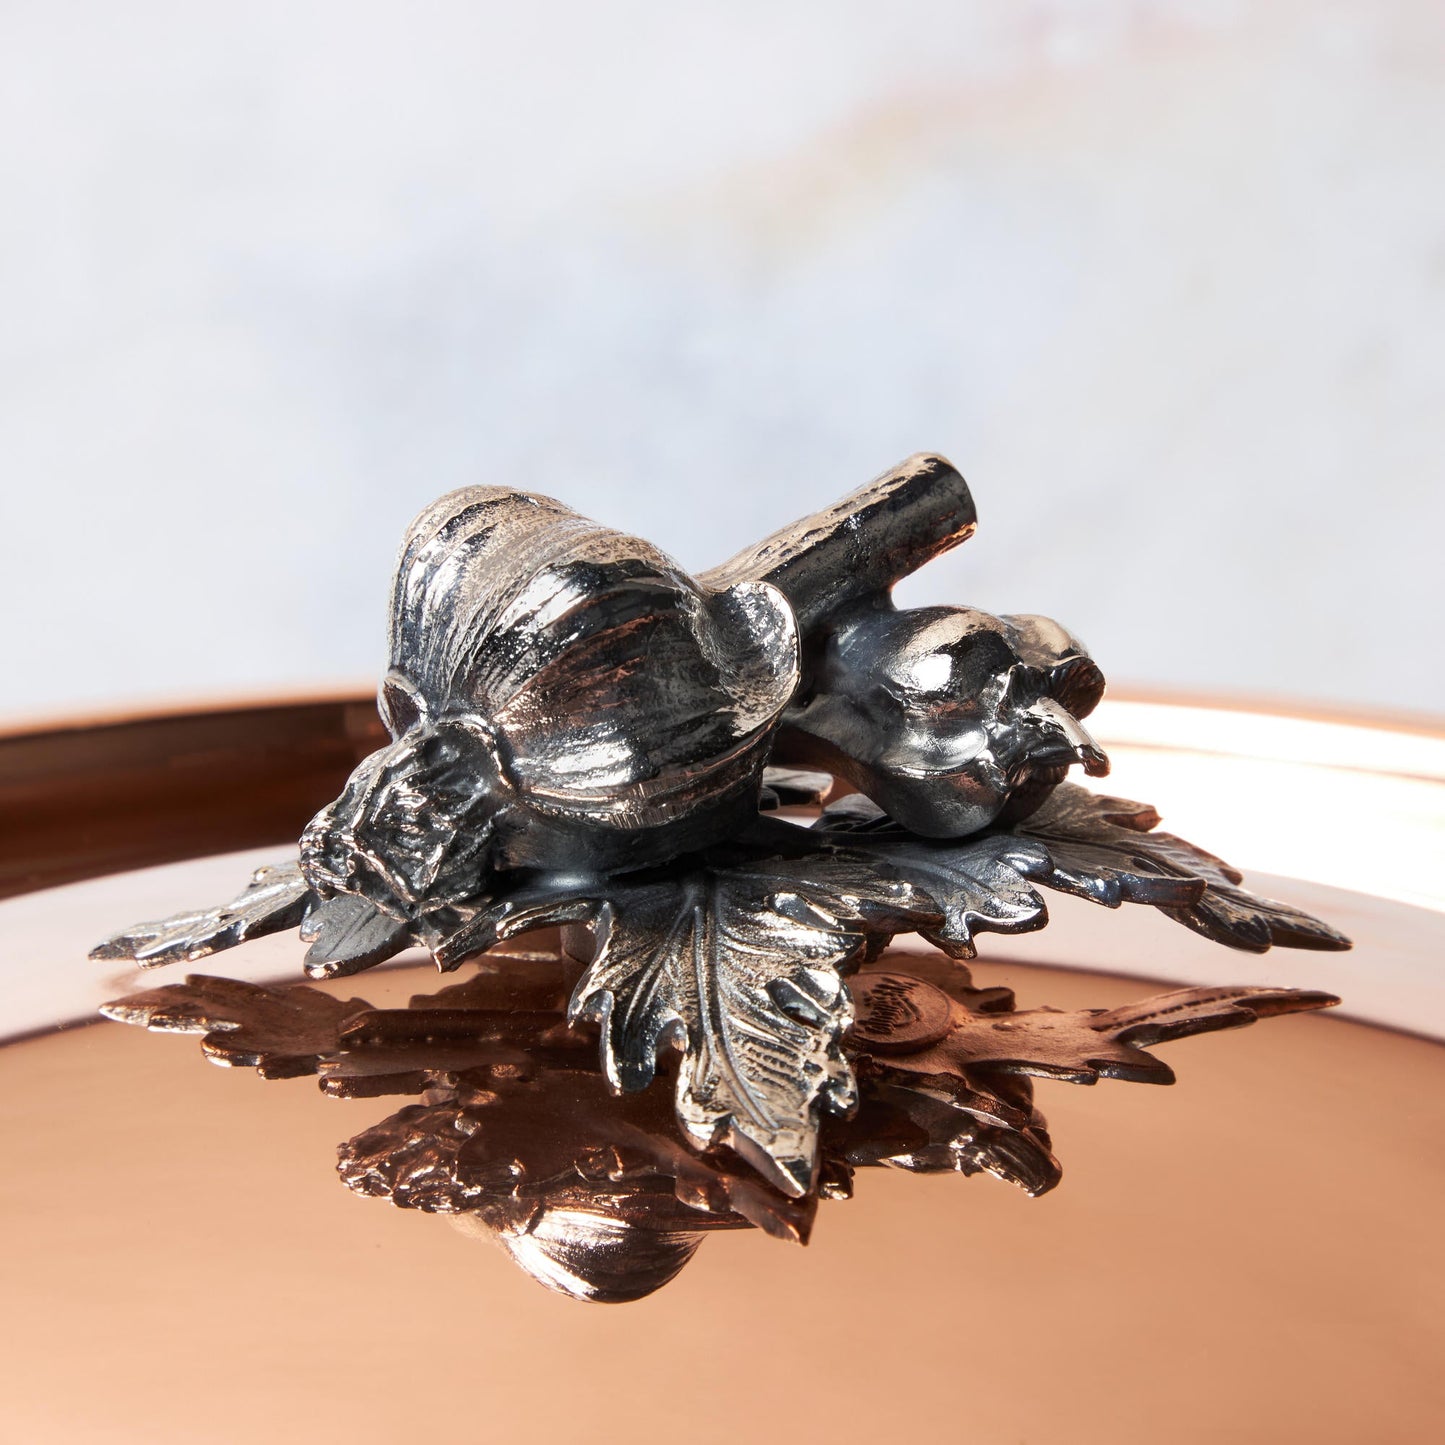 Decorated knob finial representing garlic and pepper, cast in solid bronze and silver plated, on Opus Cupra clad copper lid by Ruffoni